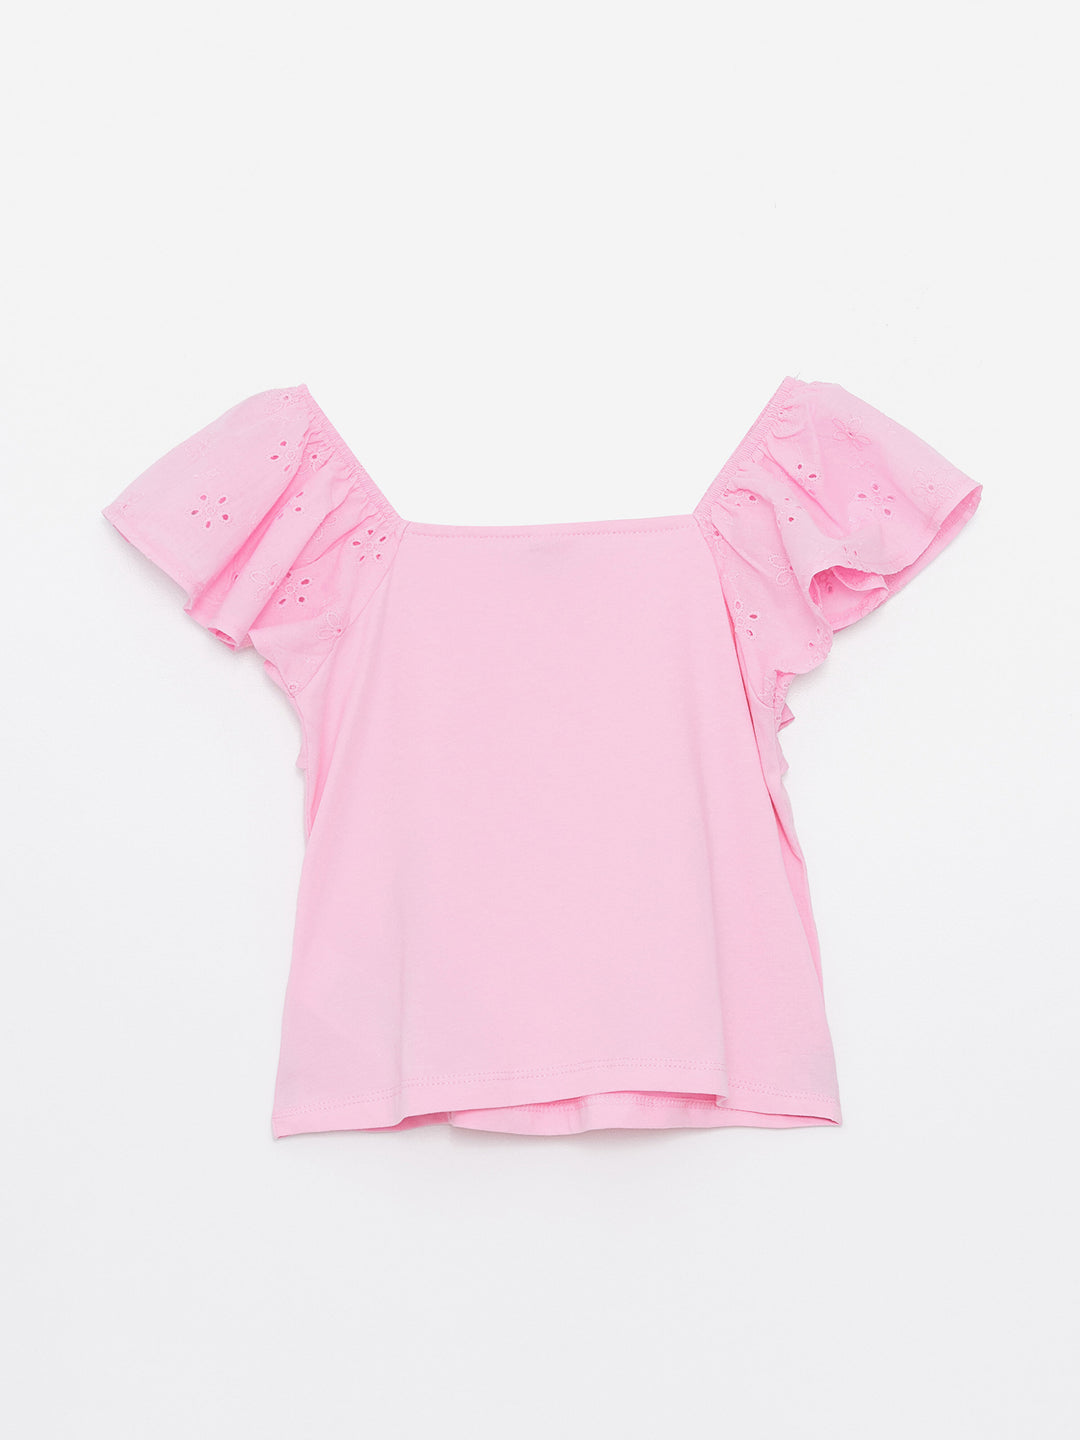 Square Neck Scallop Detailed Girls T-Shirt